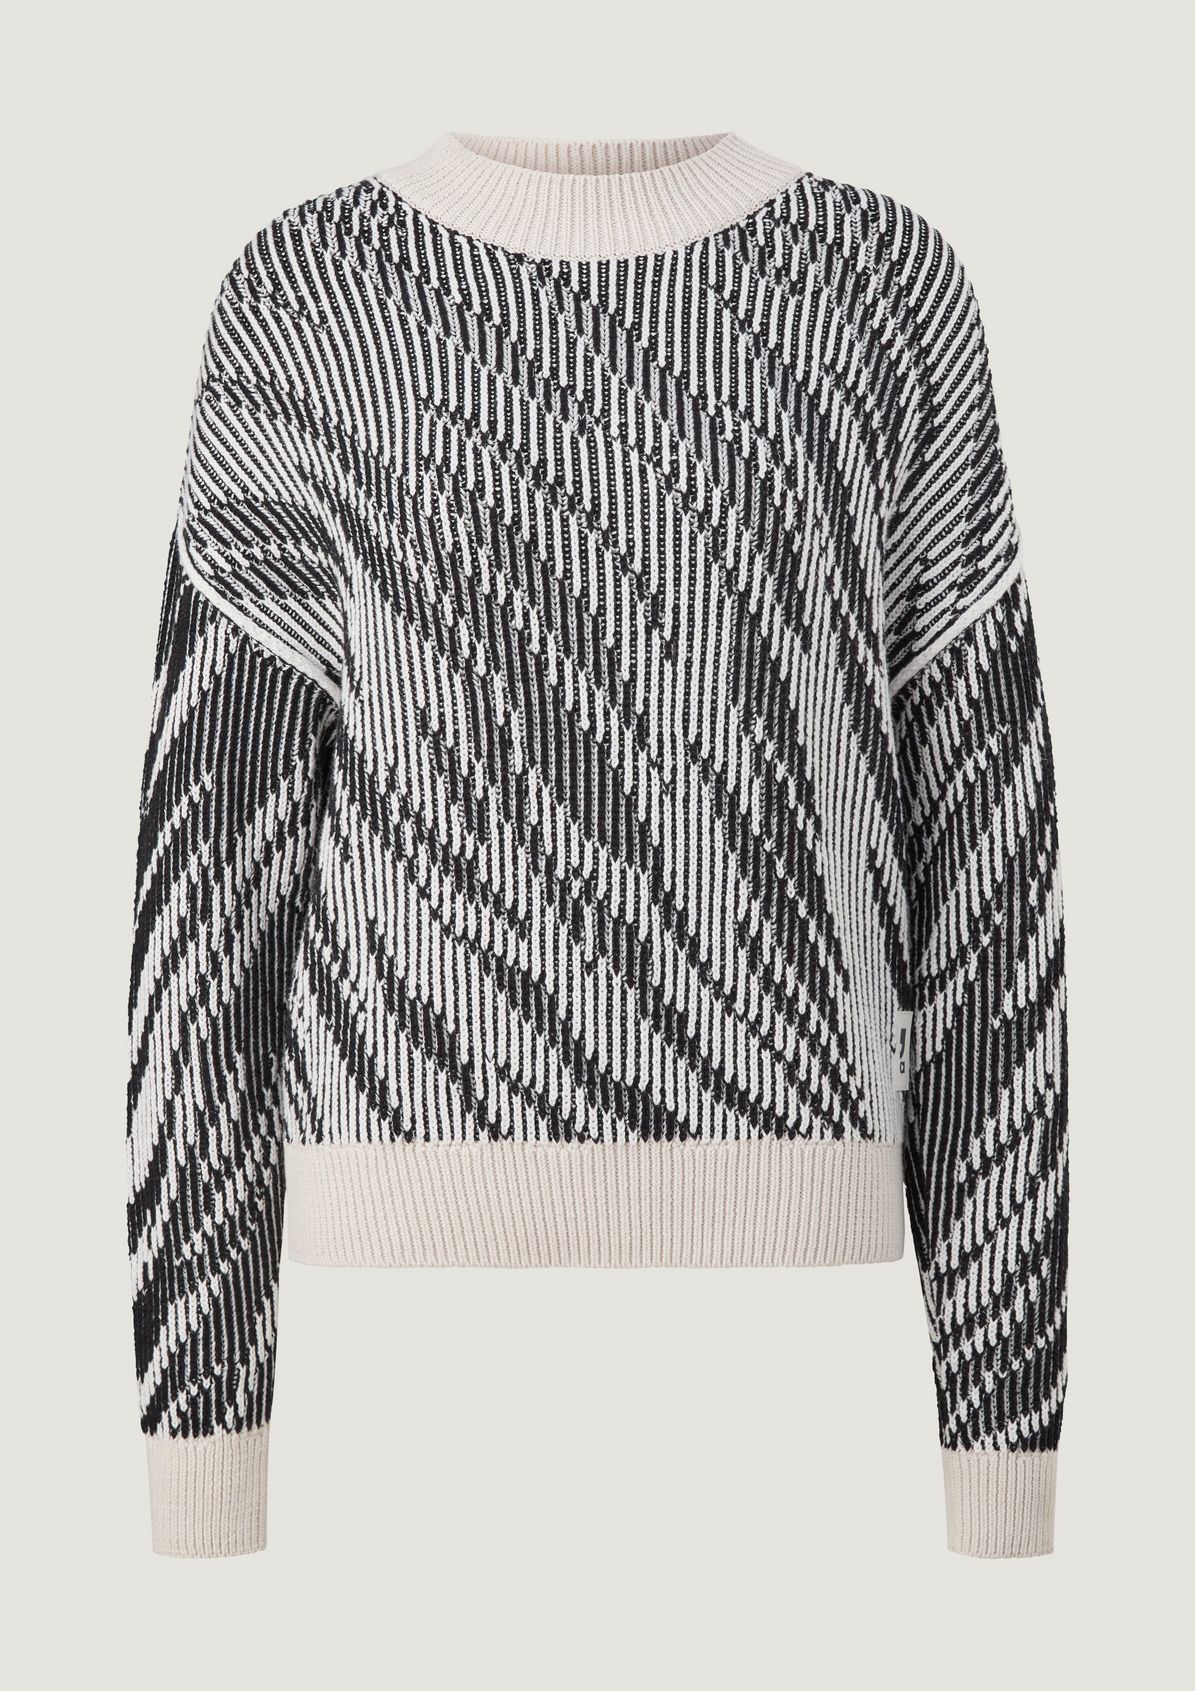 Knit jumper with a zebra pattern from comma